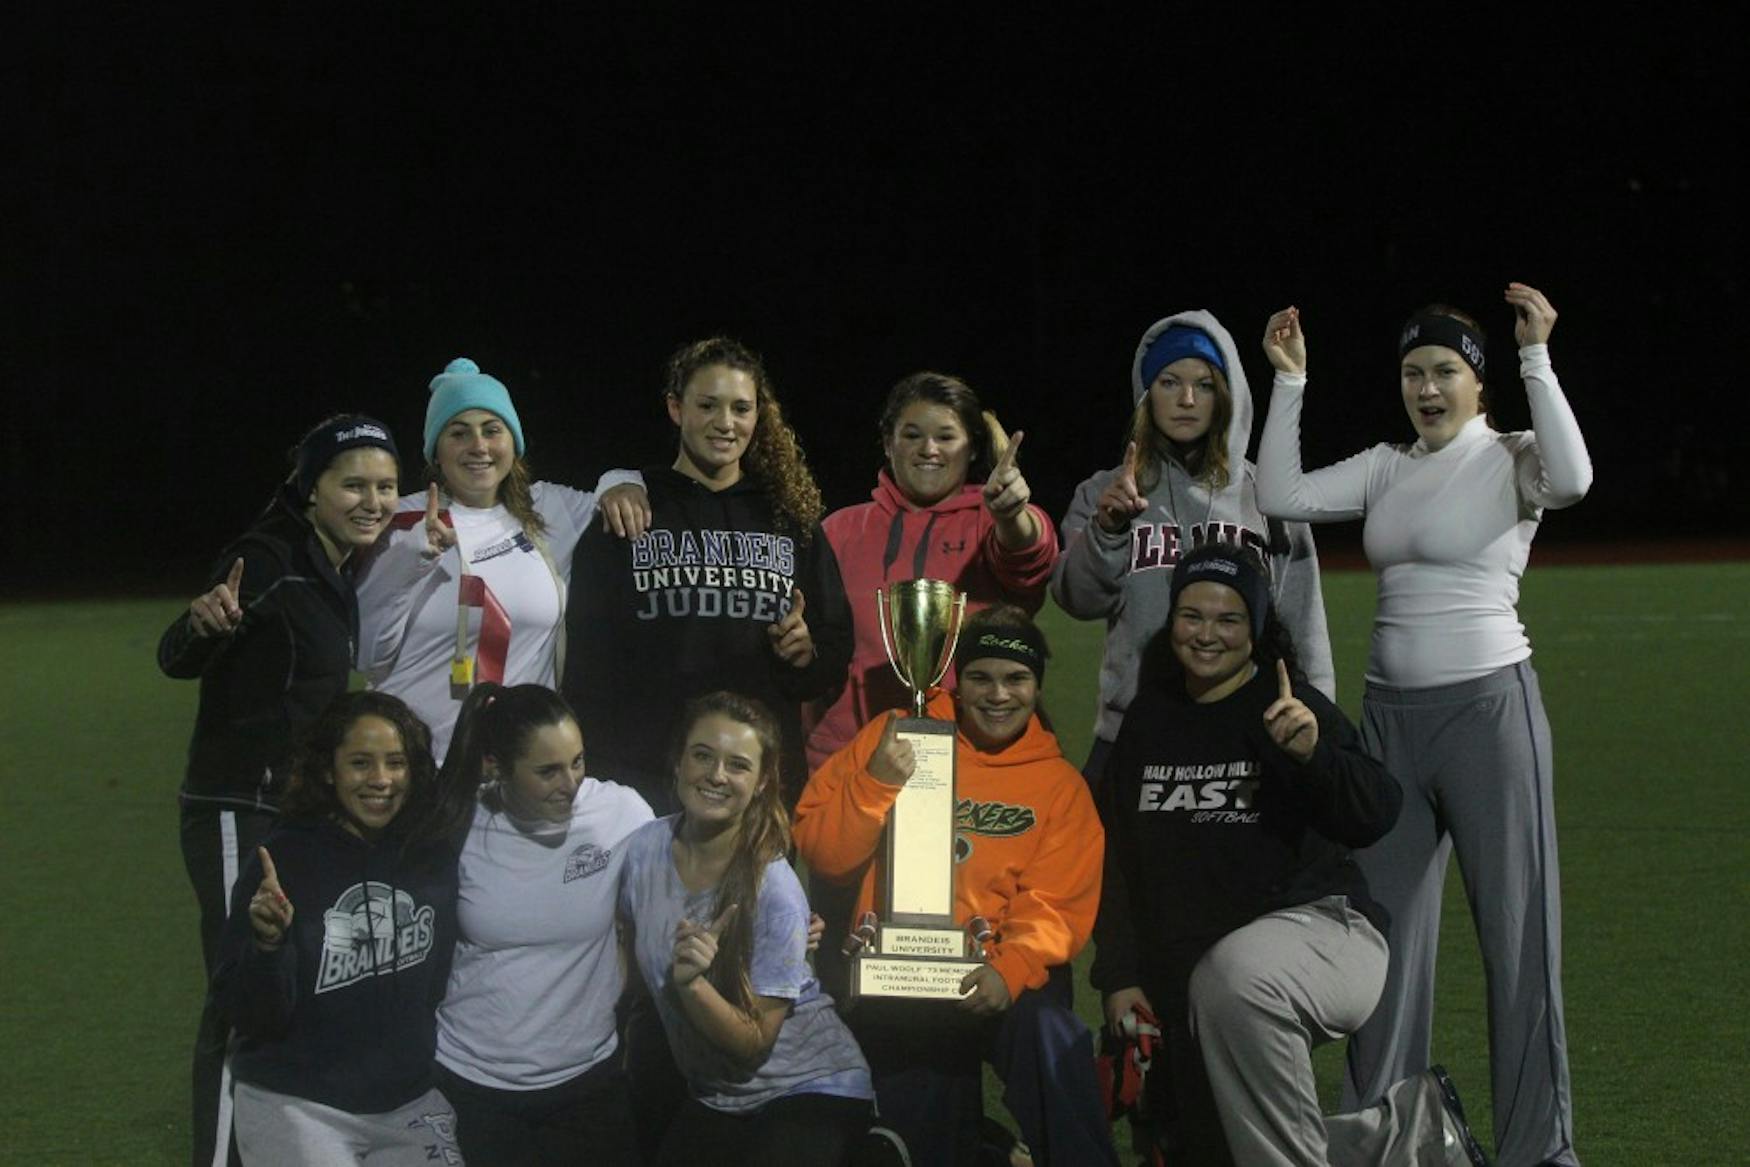 ALL SMILES: Members of Johnny Softball pose with the championship trophy following their victory in last week’s intramural final.